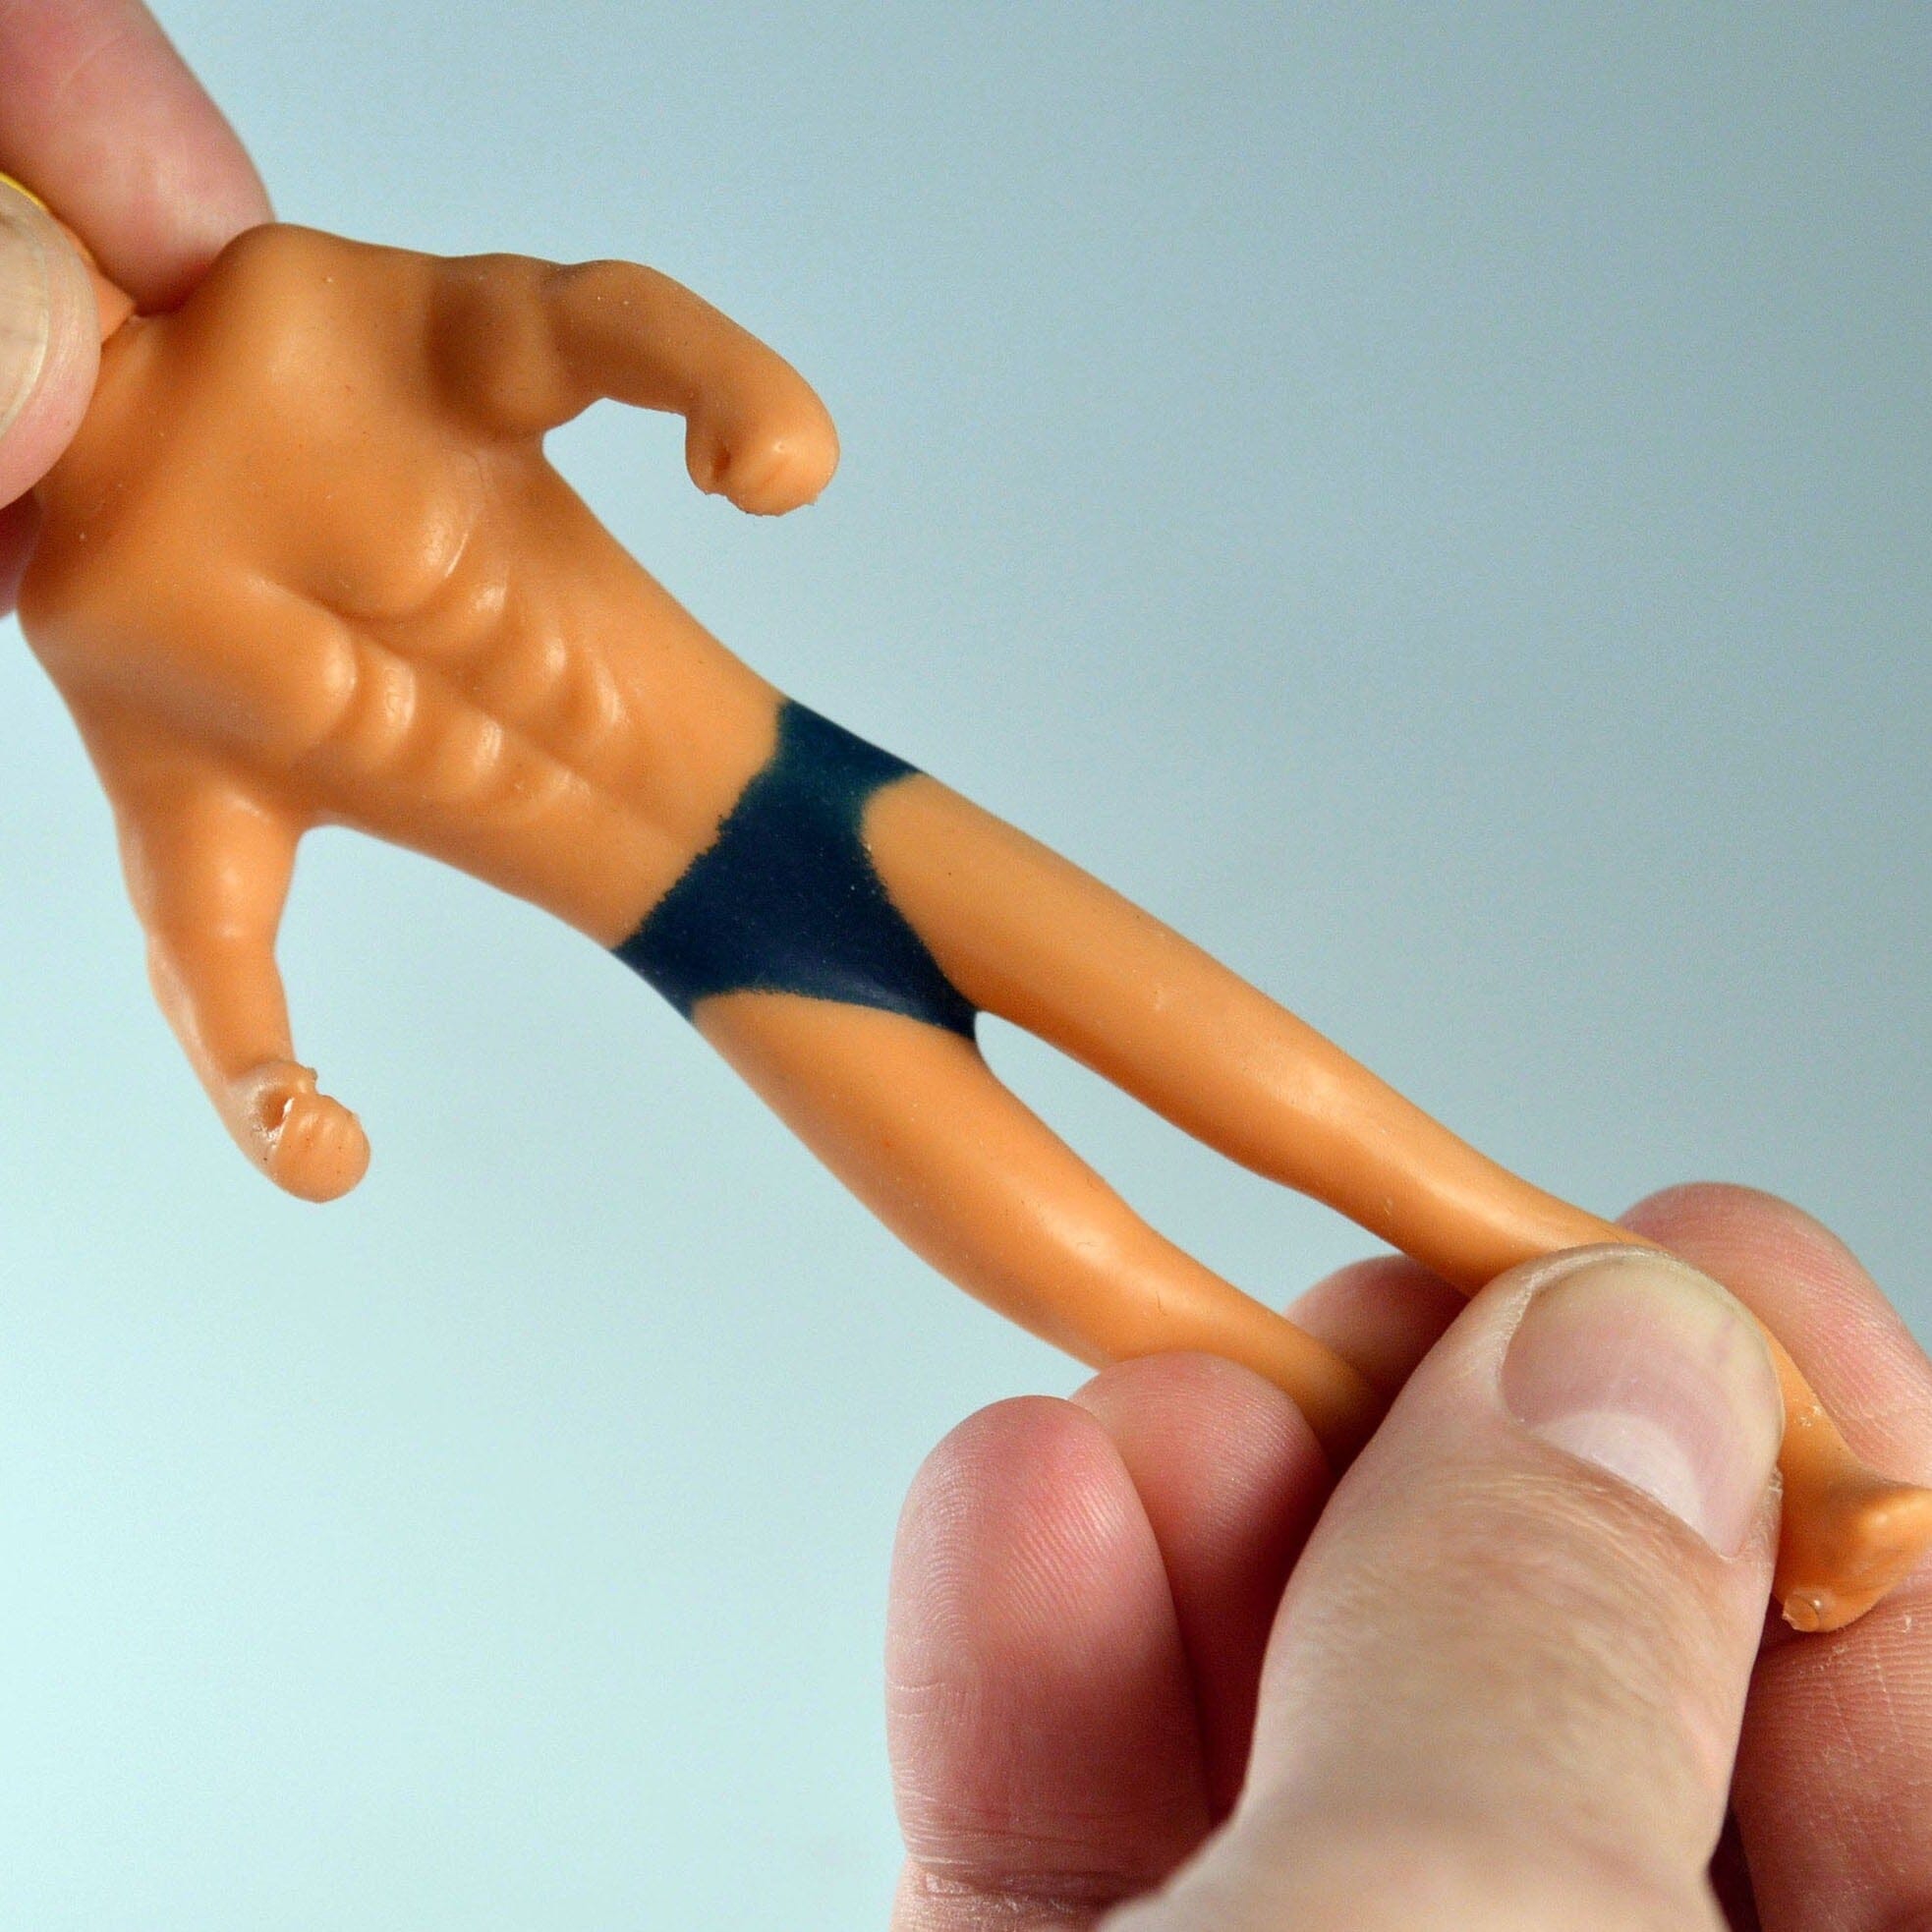 World's Smallest Stretch Armstrong Super Impulse 